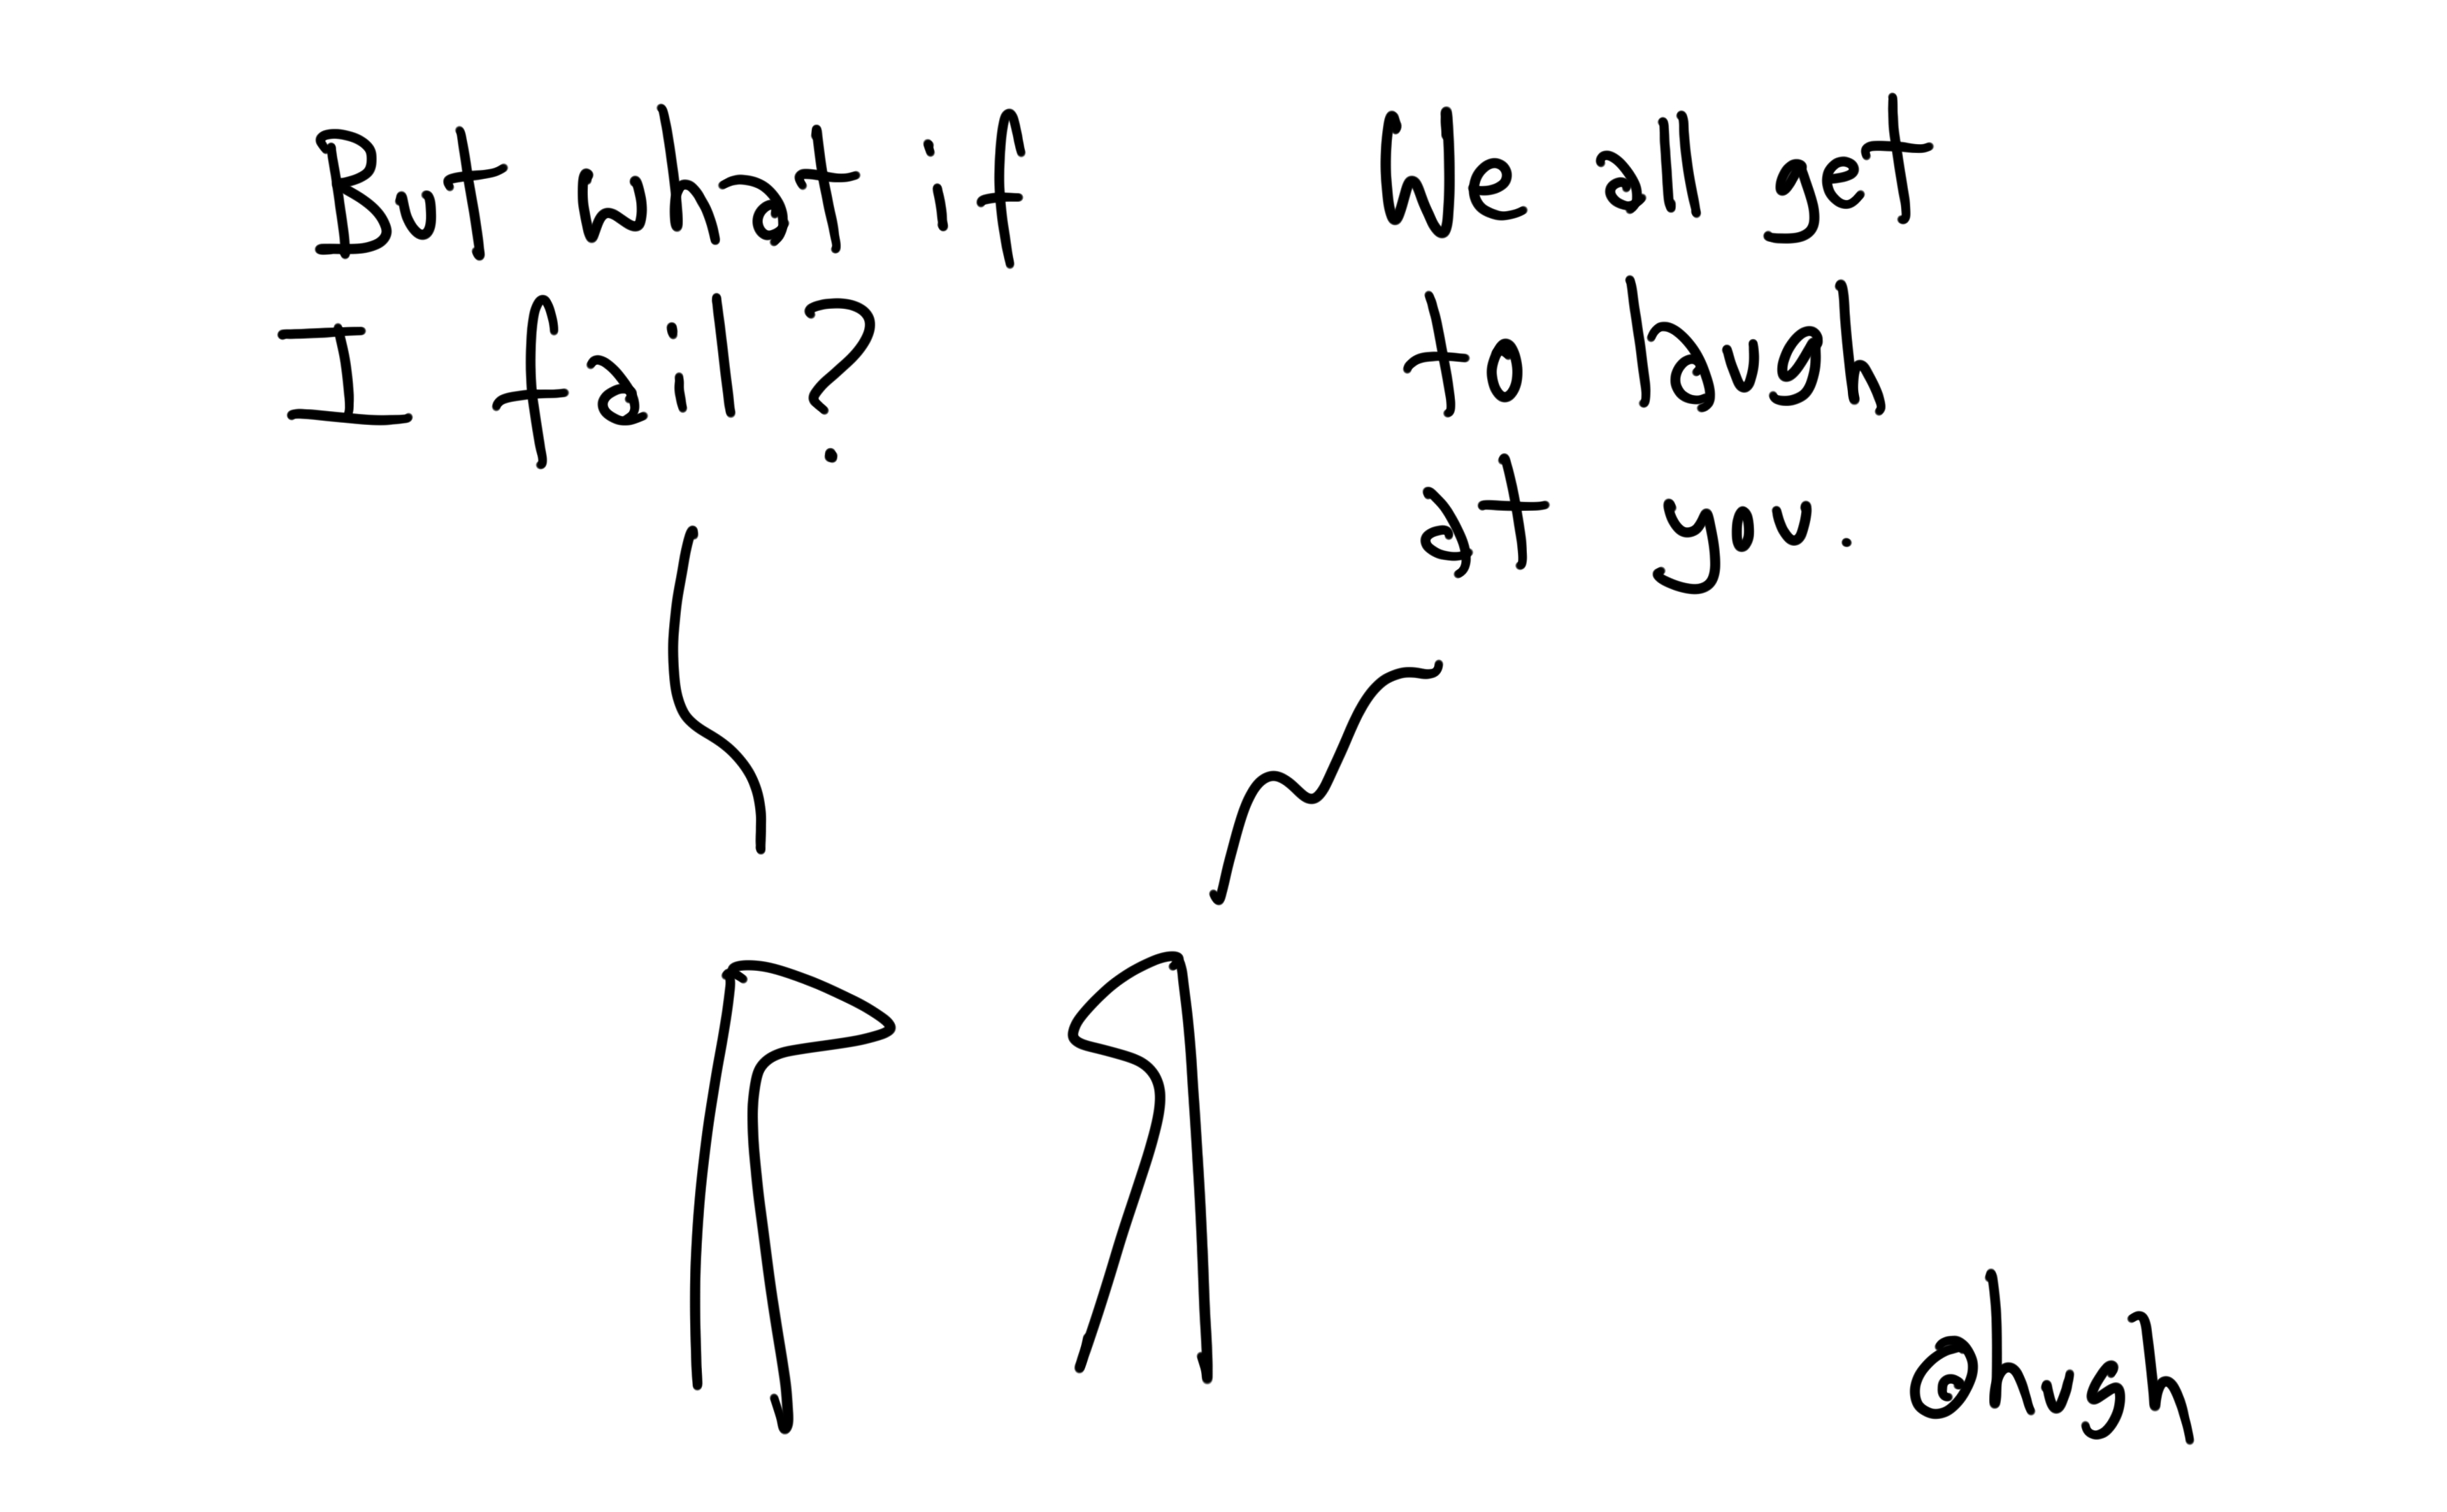 Cartoon figure 1: But what if i fail? Cartoon figure 2: We all get to laugh at you.